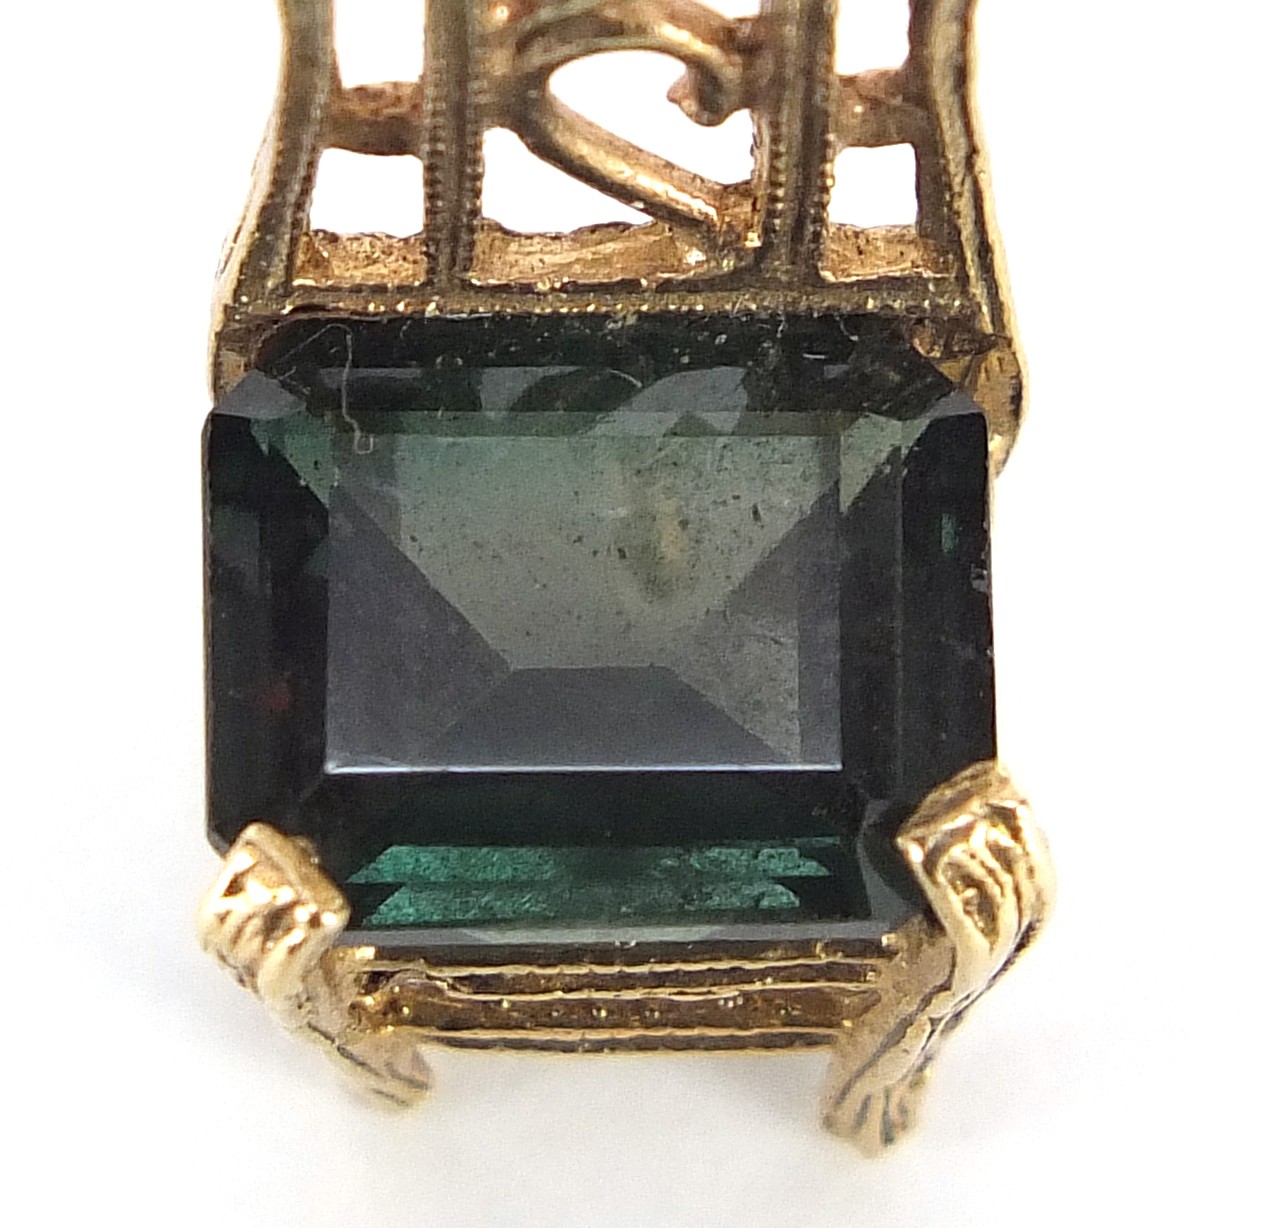 9ct gold and green stone chair charm (tests as 9ct gold), 3.1cm high, 3.4g - Image 3 of 3